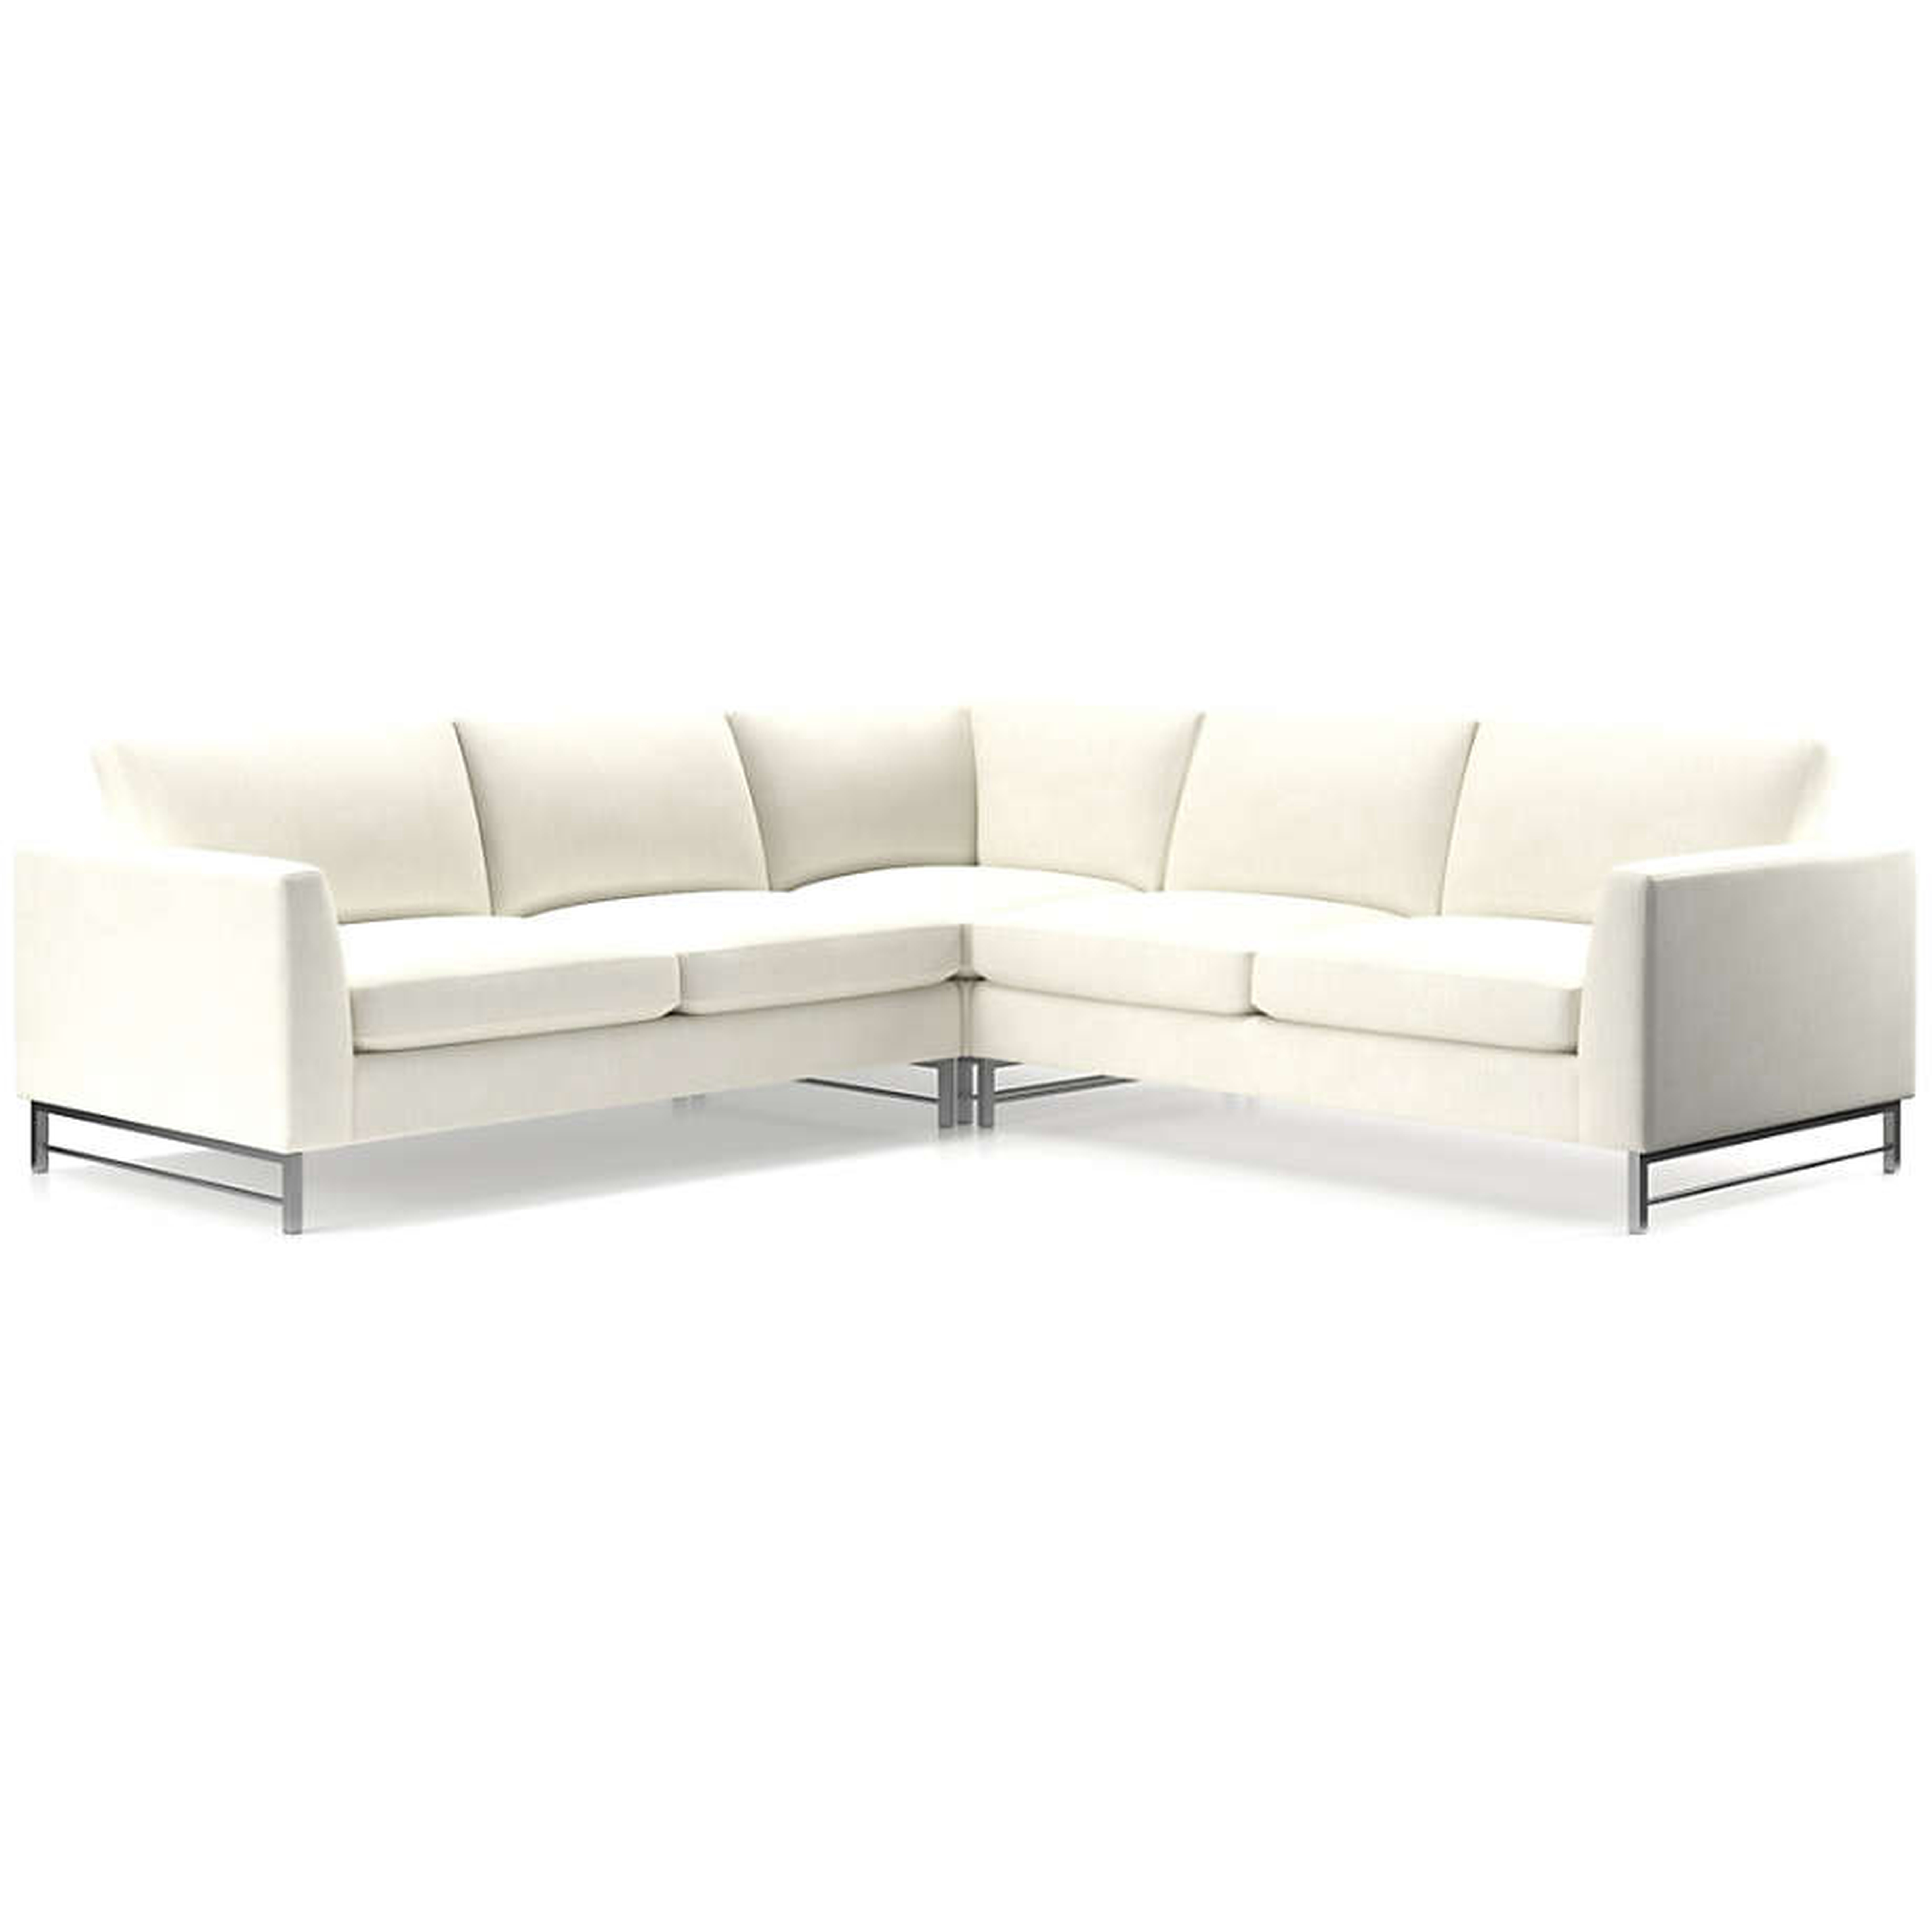 Tyson 3-Piece Right Corner Sectional with Stainless Steel Base - Vail "Snow" Family friendly Fabric - Crate and Barrel